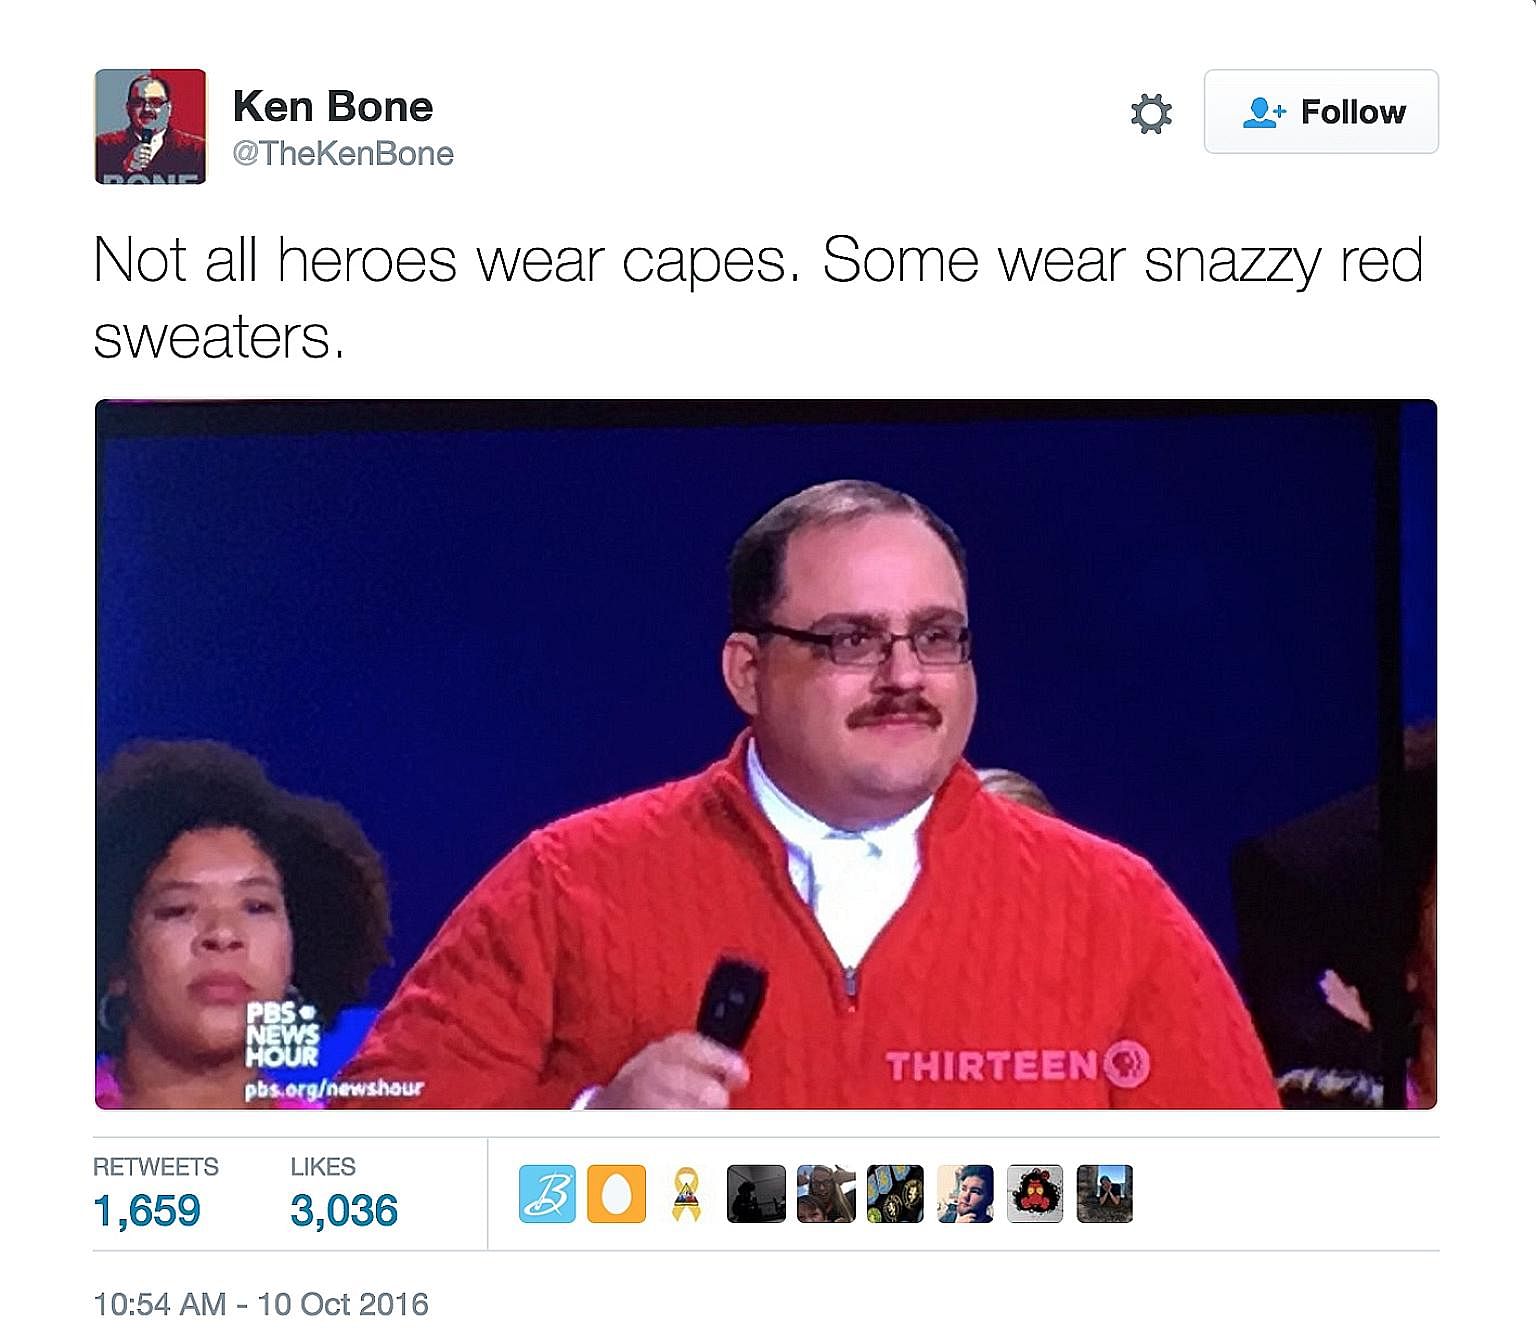 Mr Kenneth Bone had initially intended to wear an olive-coloured suit, but donned a red fleece sweater when he split his trousers while getting into his car. His earnest demeanour at a United States presidential debate has made him an Internet hit.